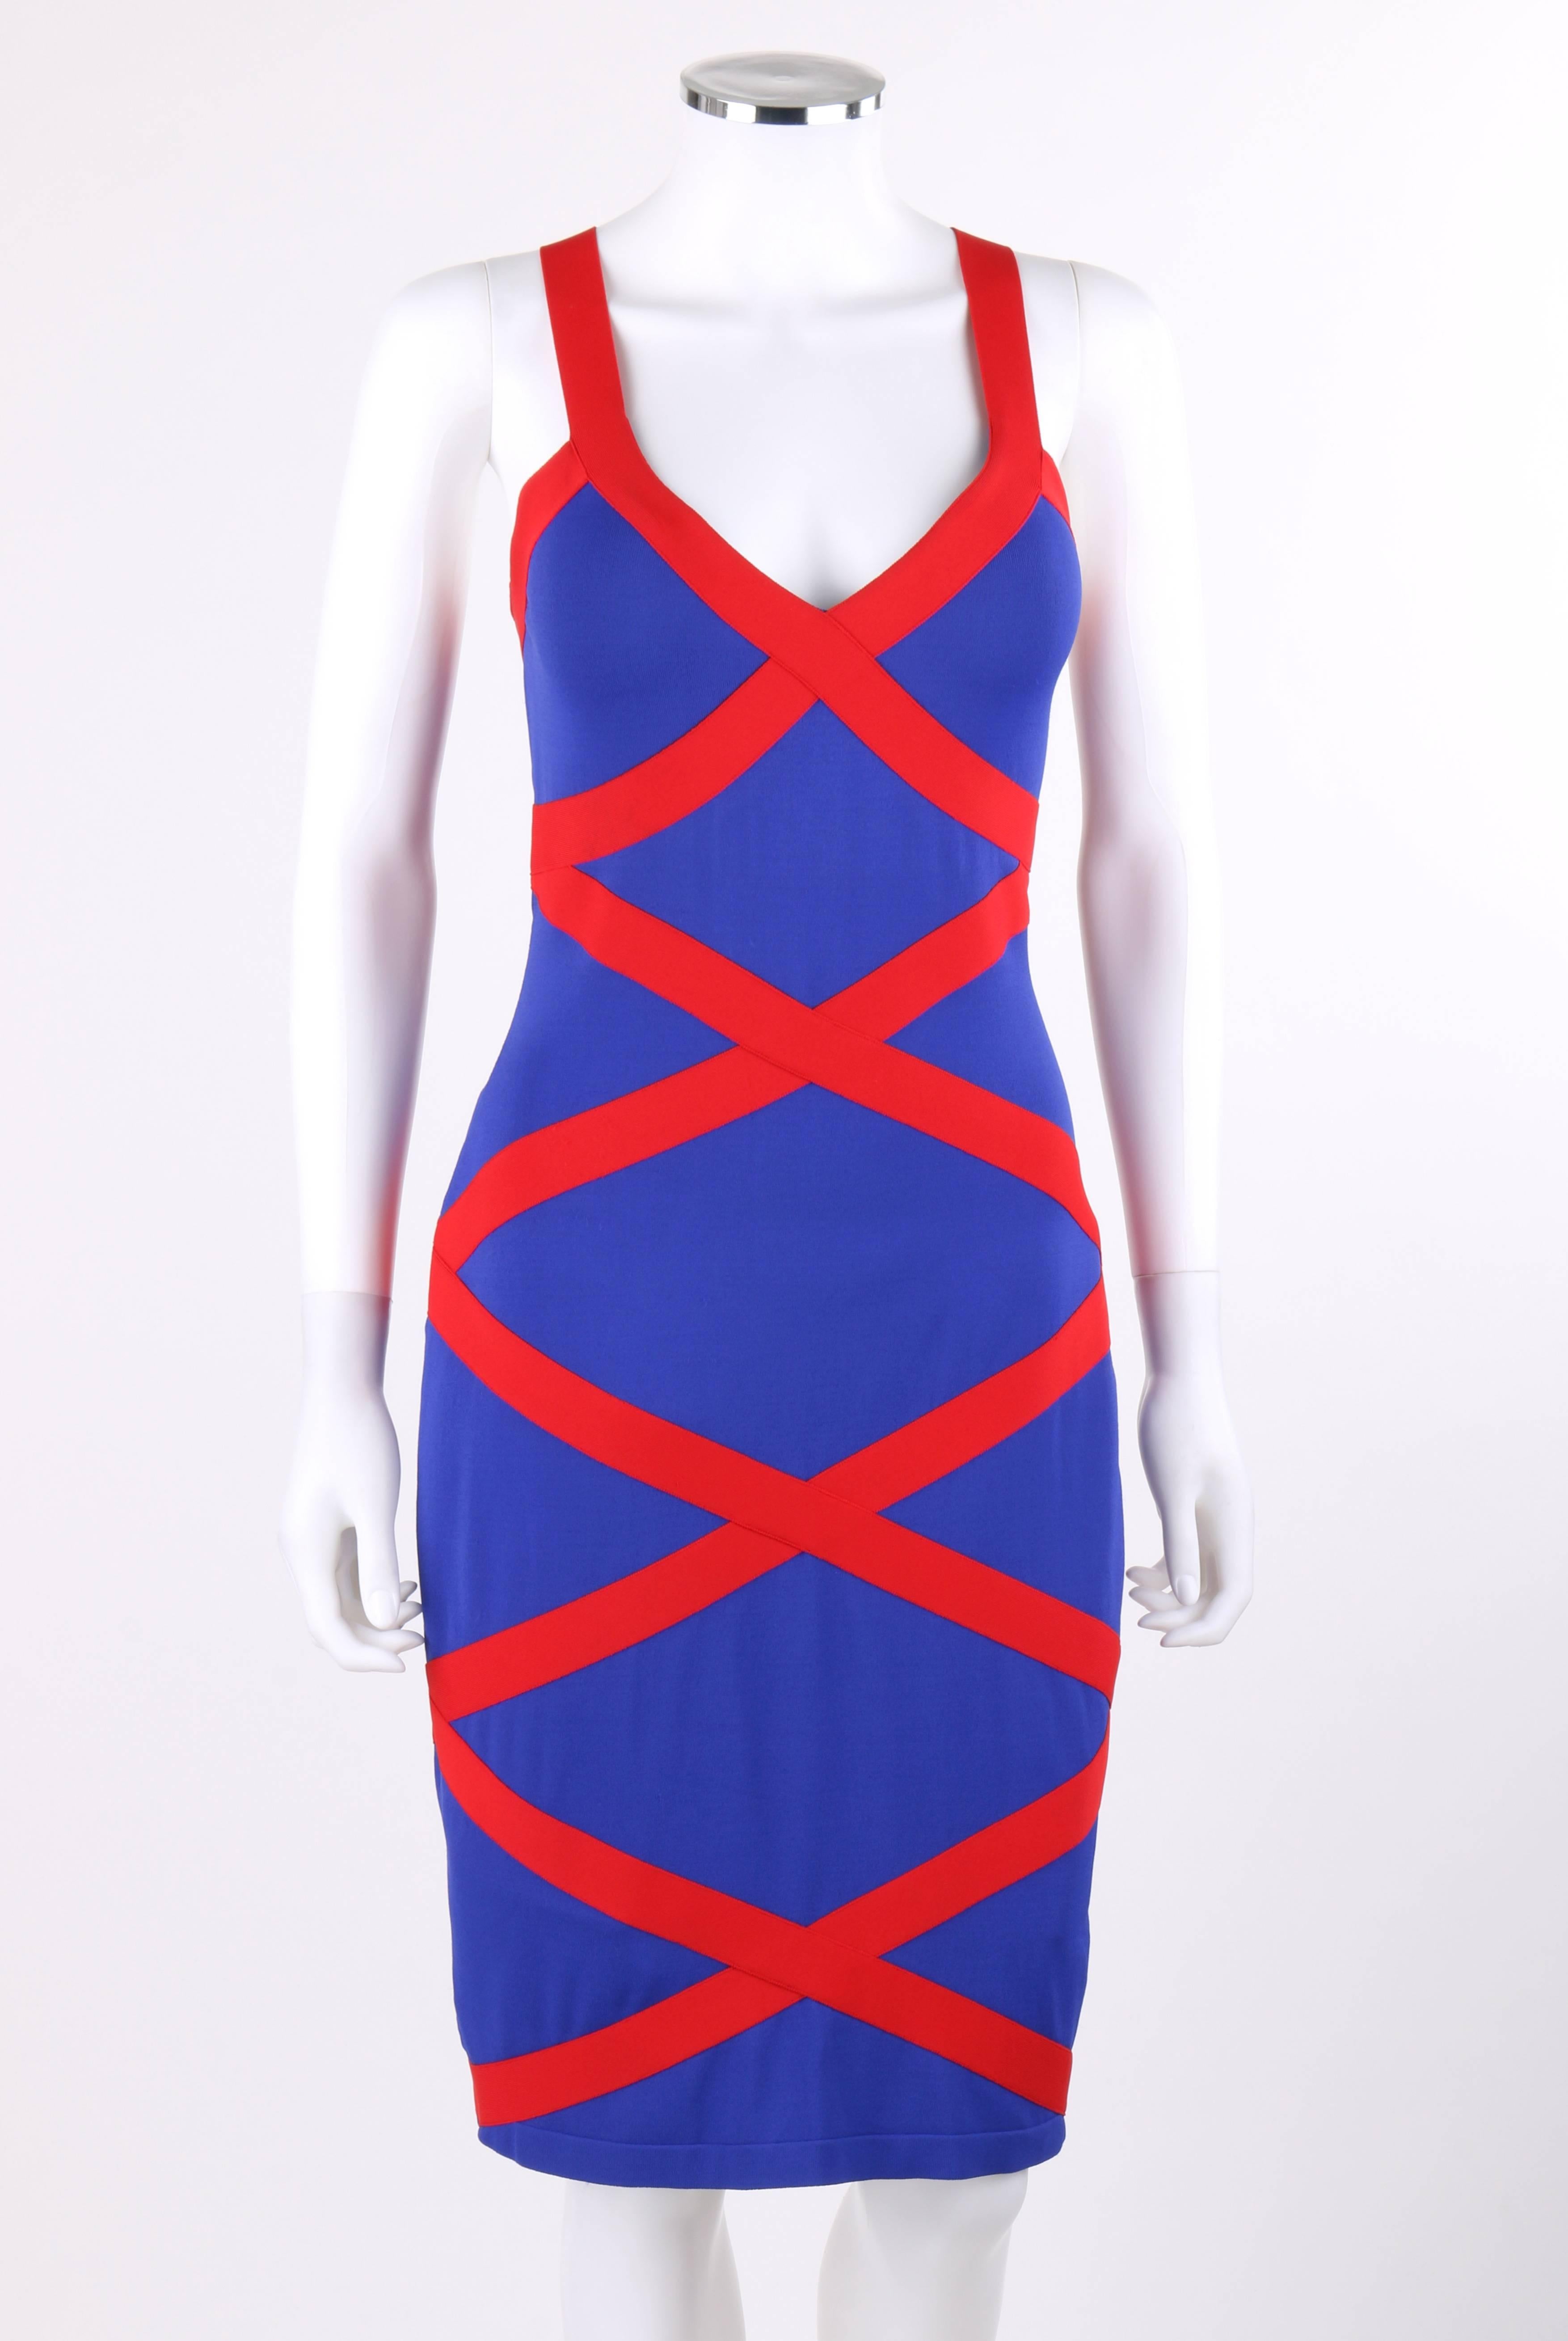 Alexander McQueen Resort 2010 royal blue and red criss-cross bandage bodycon dress. V-neckline. Thick straps which cross from front to back to form a v-shape. Royal blue base with red bandage over top forming a criss-cross pattern throughout.